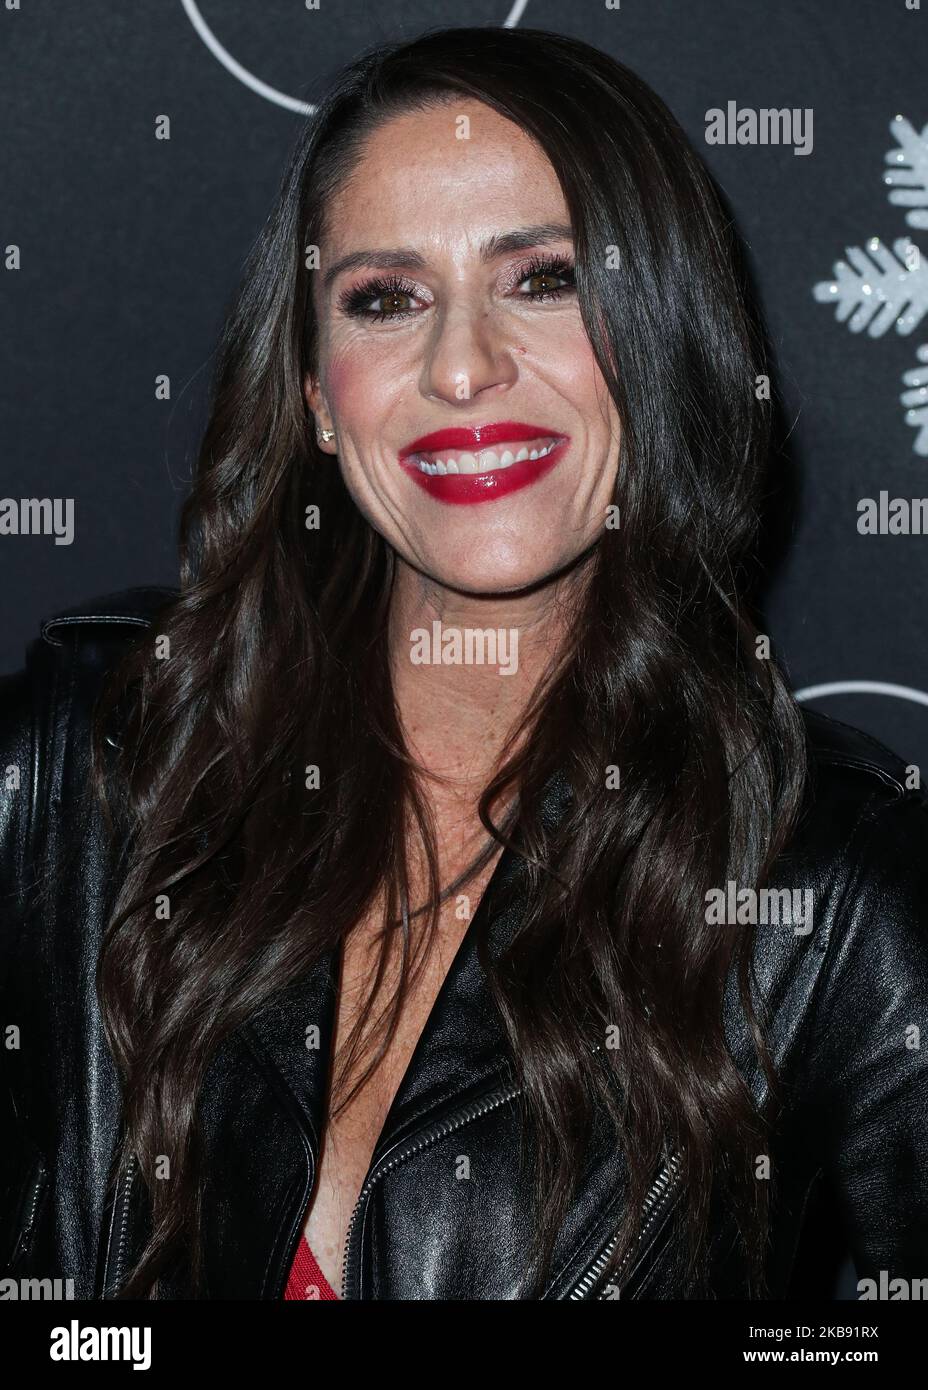 WESTWOOD, LOS ANGELES, CALIFORNIA, USA - OCTOBER 22: Actress Soleil Moon Frye arrives at the 'It's A Wonderful Lifetime' Holiday Party held at STK Los Angeles at W Los Angeles - West Beverly Hills on October 22, 2019 in Westwood, Los Angeles, California, United States. (Photo by Xavier Collin/Image Press Agency/NurPhoto) Stock Photo